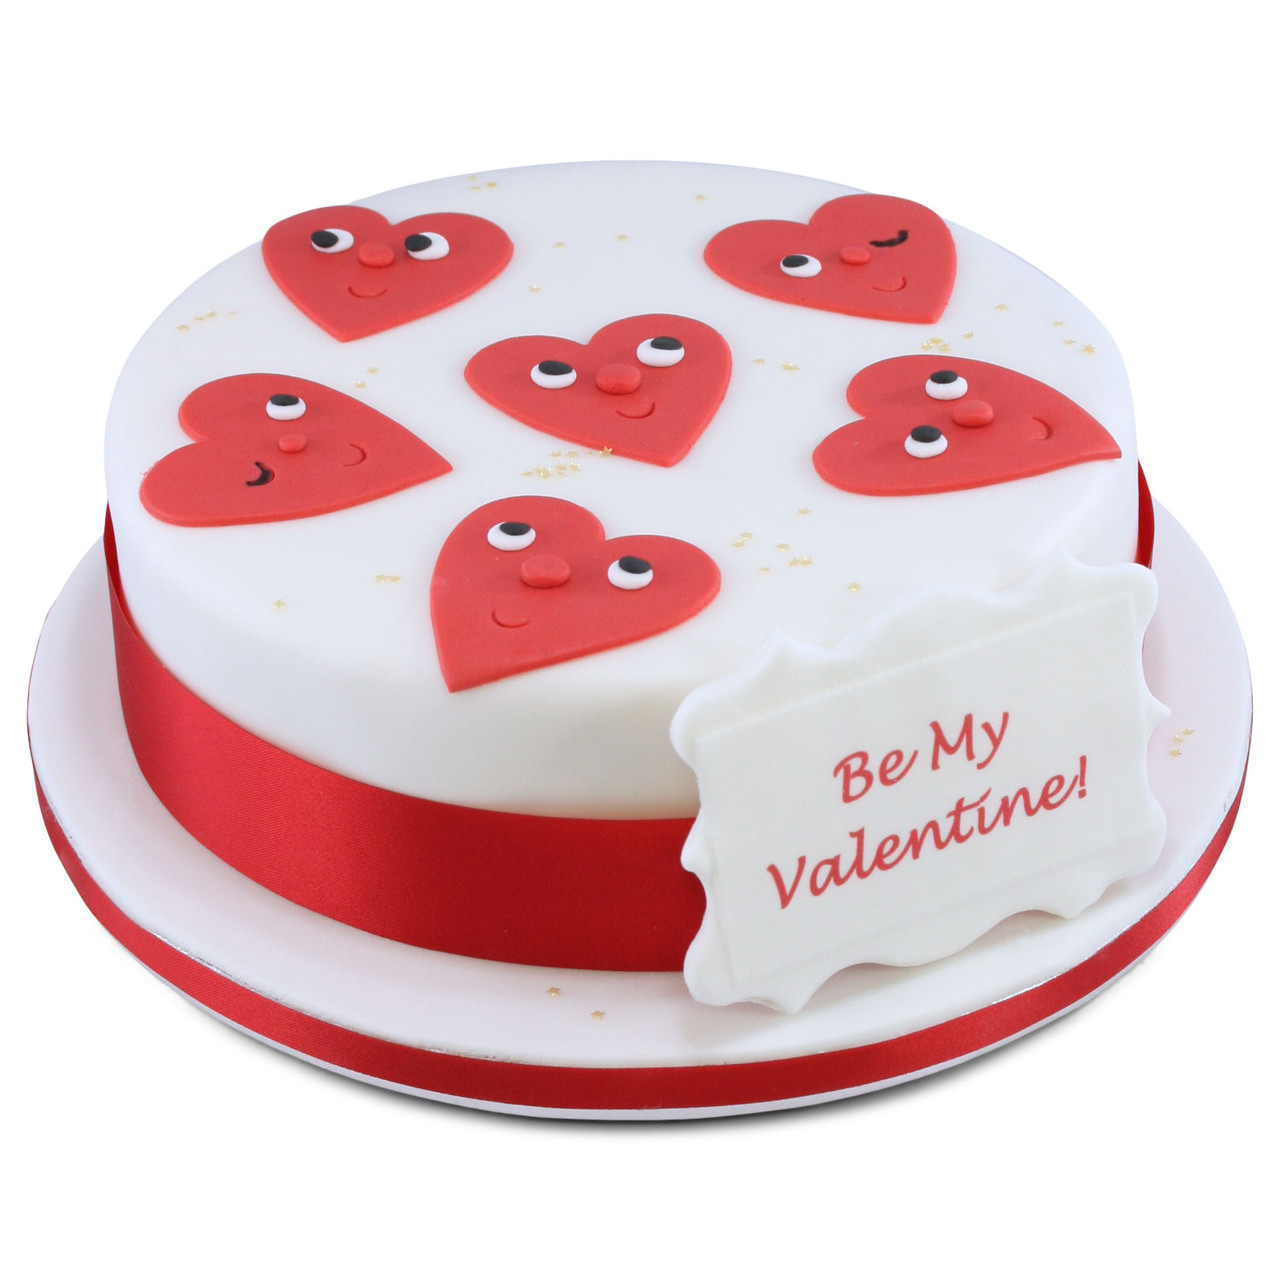 Red & White Valentine's Day Cake | Baked by Nataleen